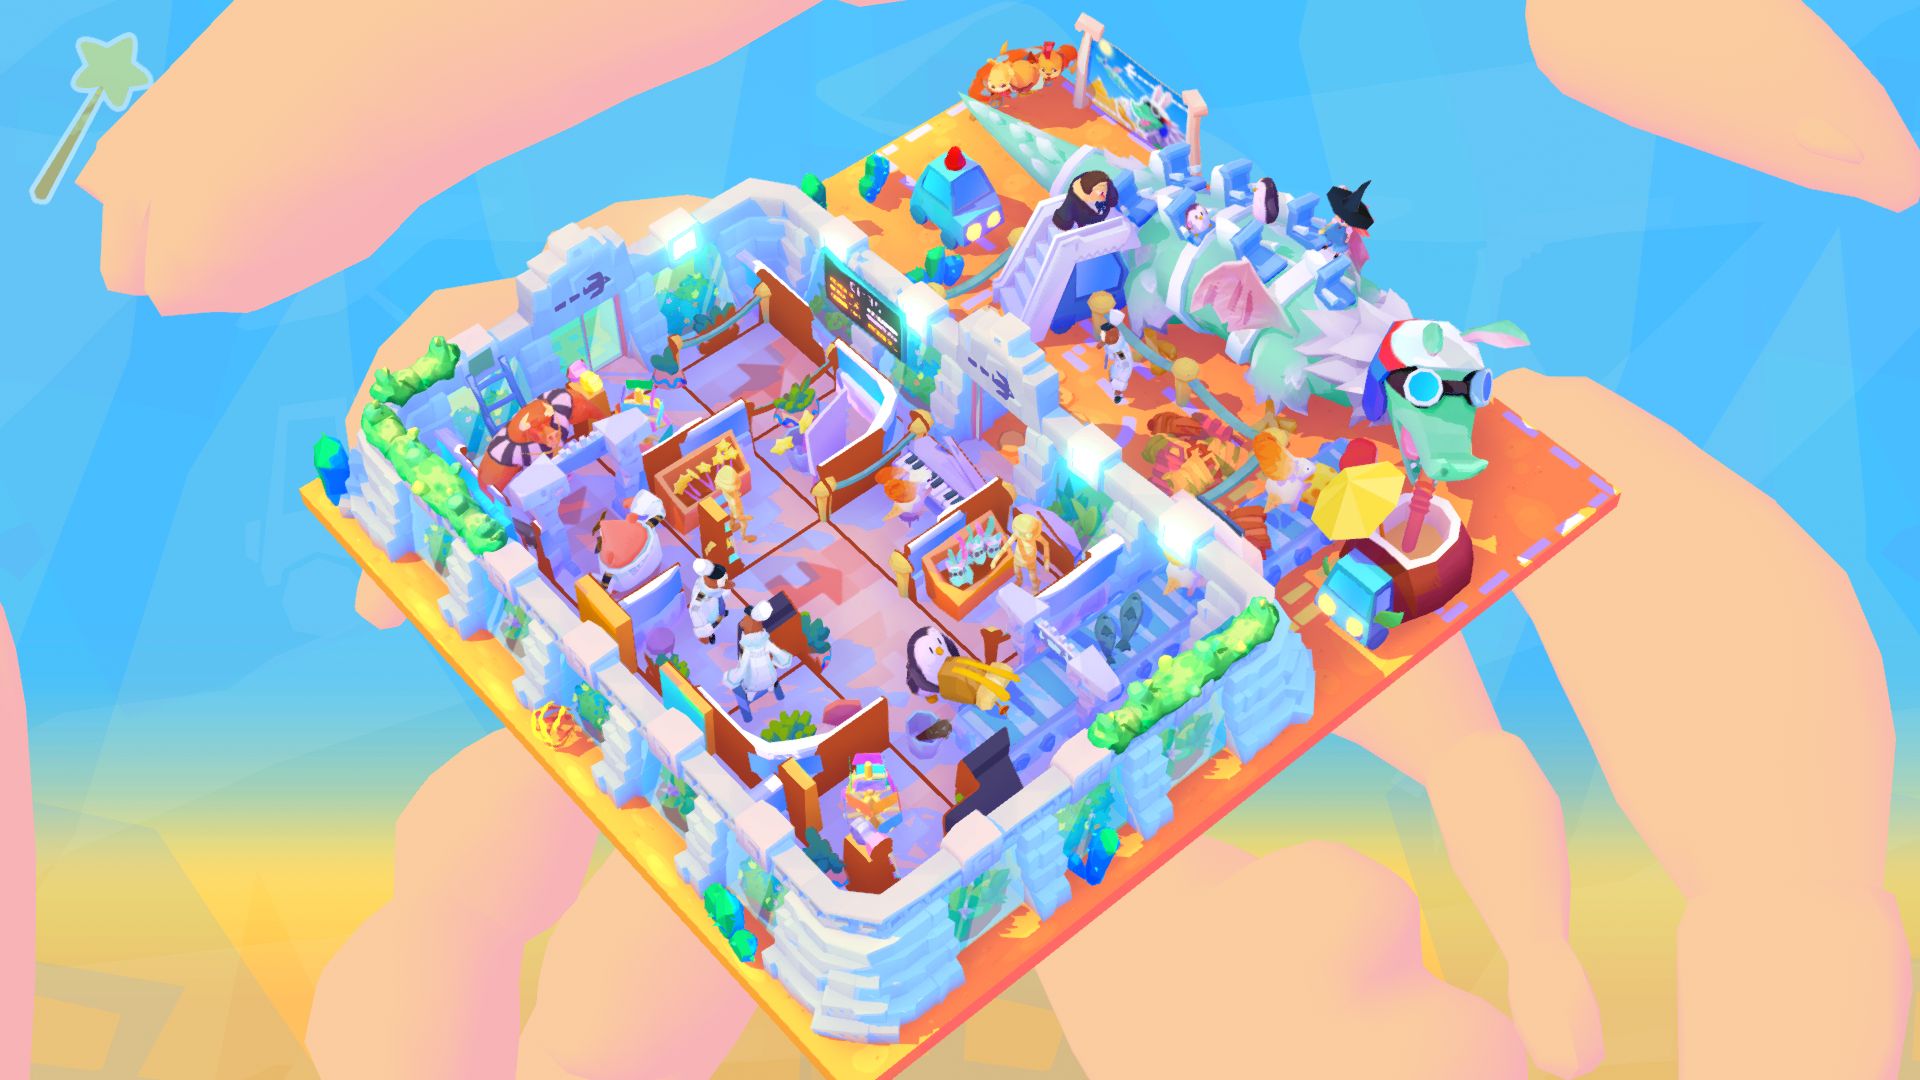 Half the puzzle of a 3D diorama of a fantasy airport in Harmony's Odyssey.  The plane is a blue dragon, fueling my drink from a giant cocktail